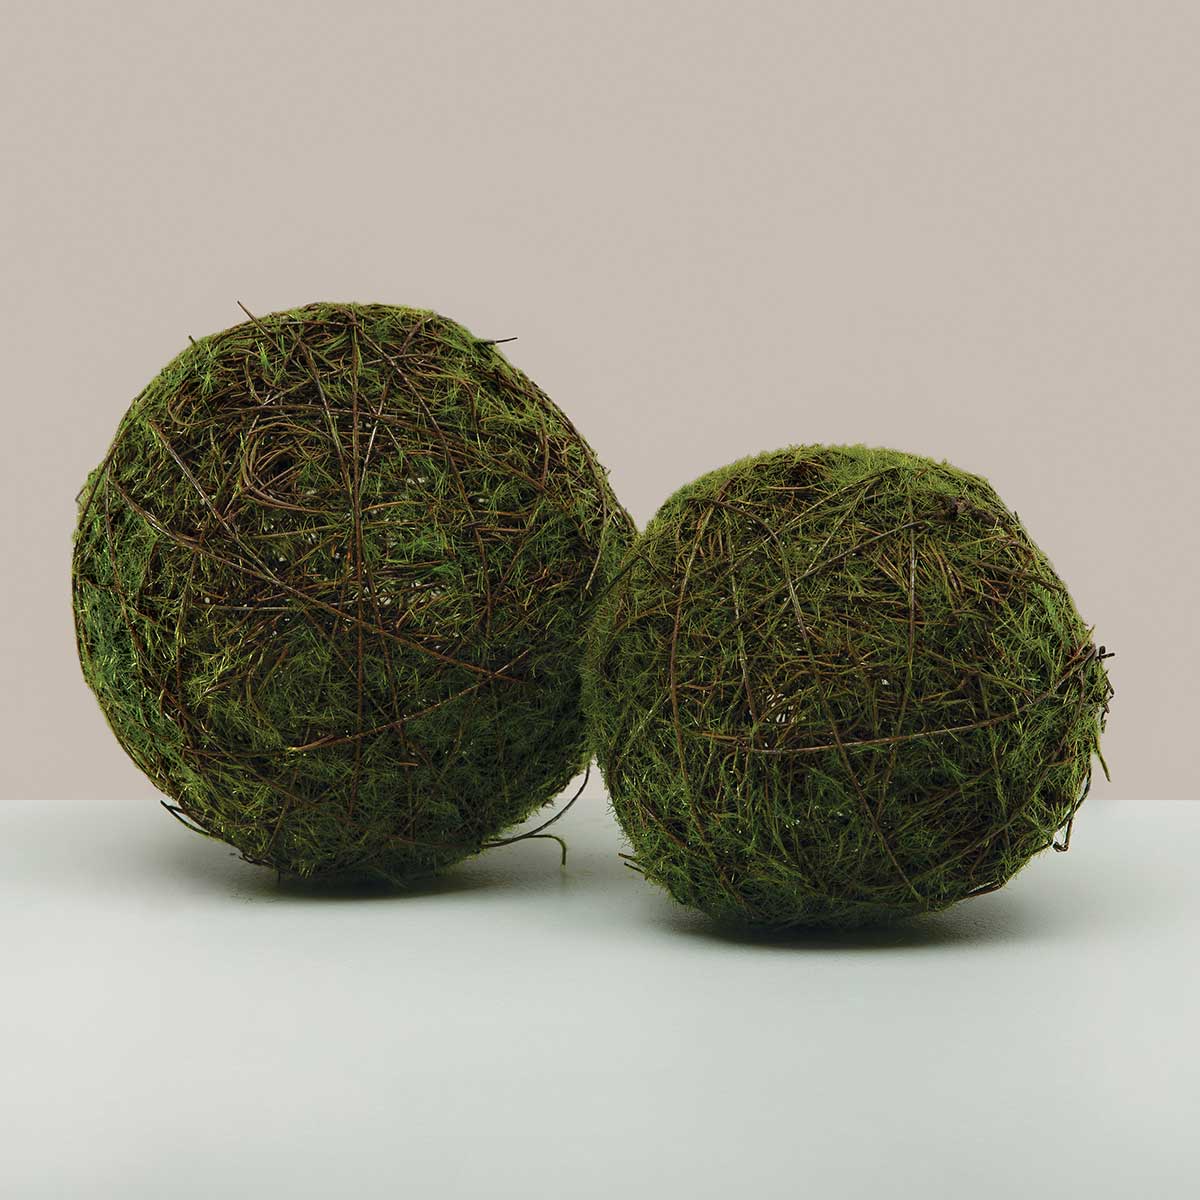 MOSSY TWIG BALL LARGE 4.5"